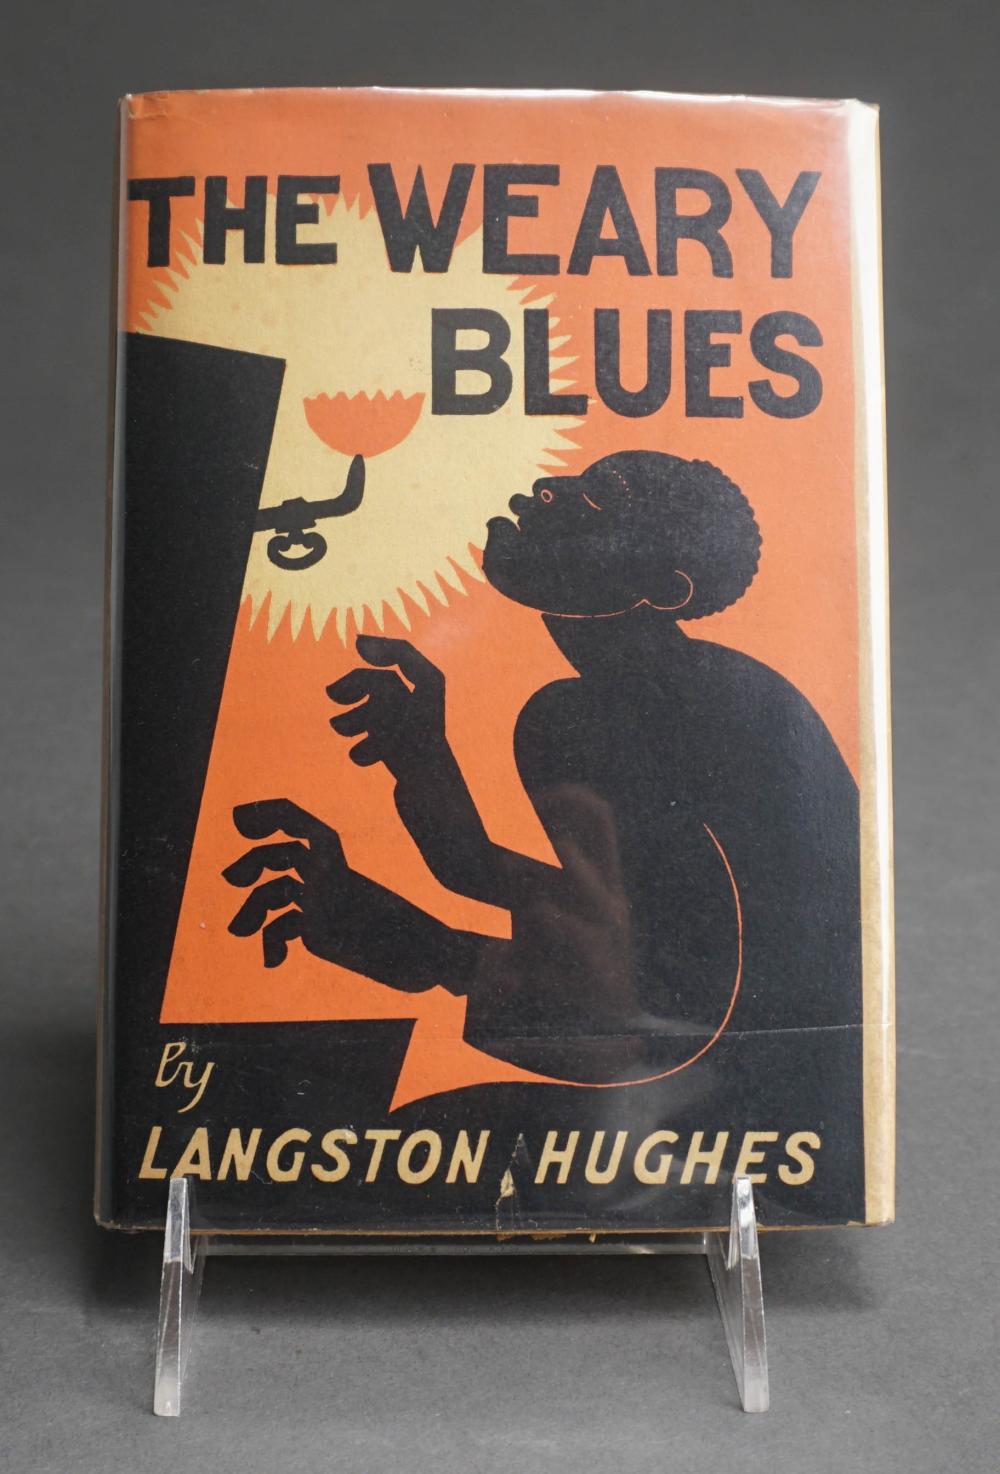 'THE WEARY BLUES', LANGSTON HUGHES